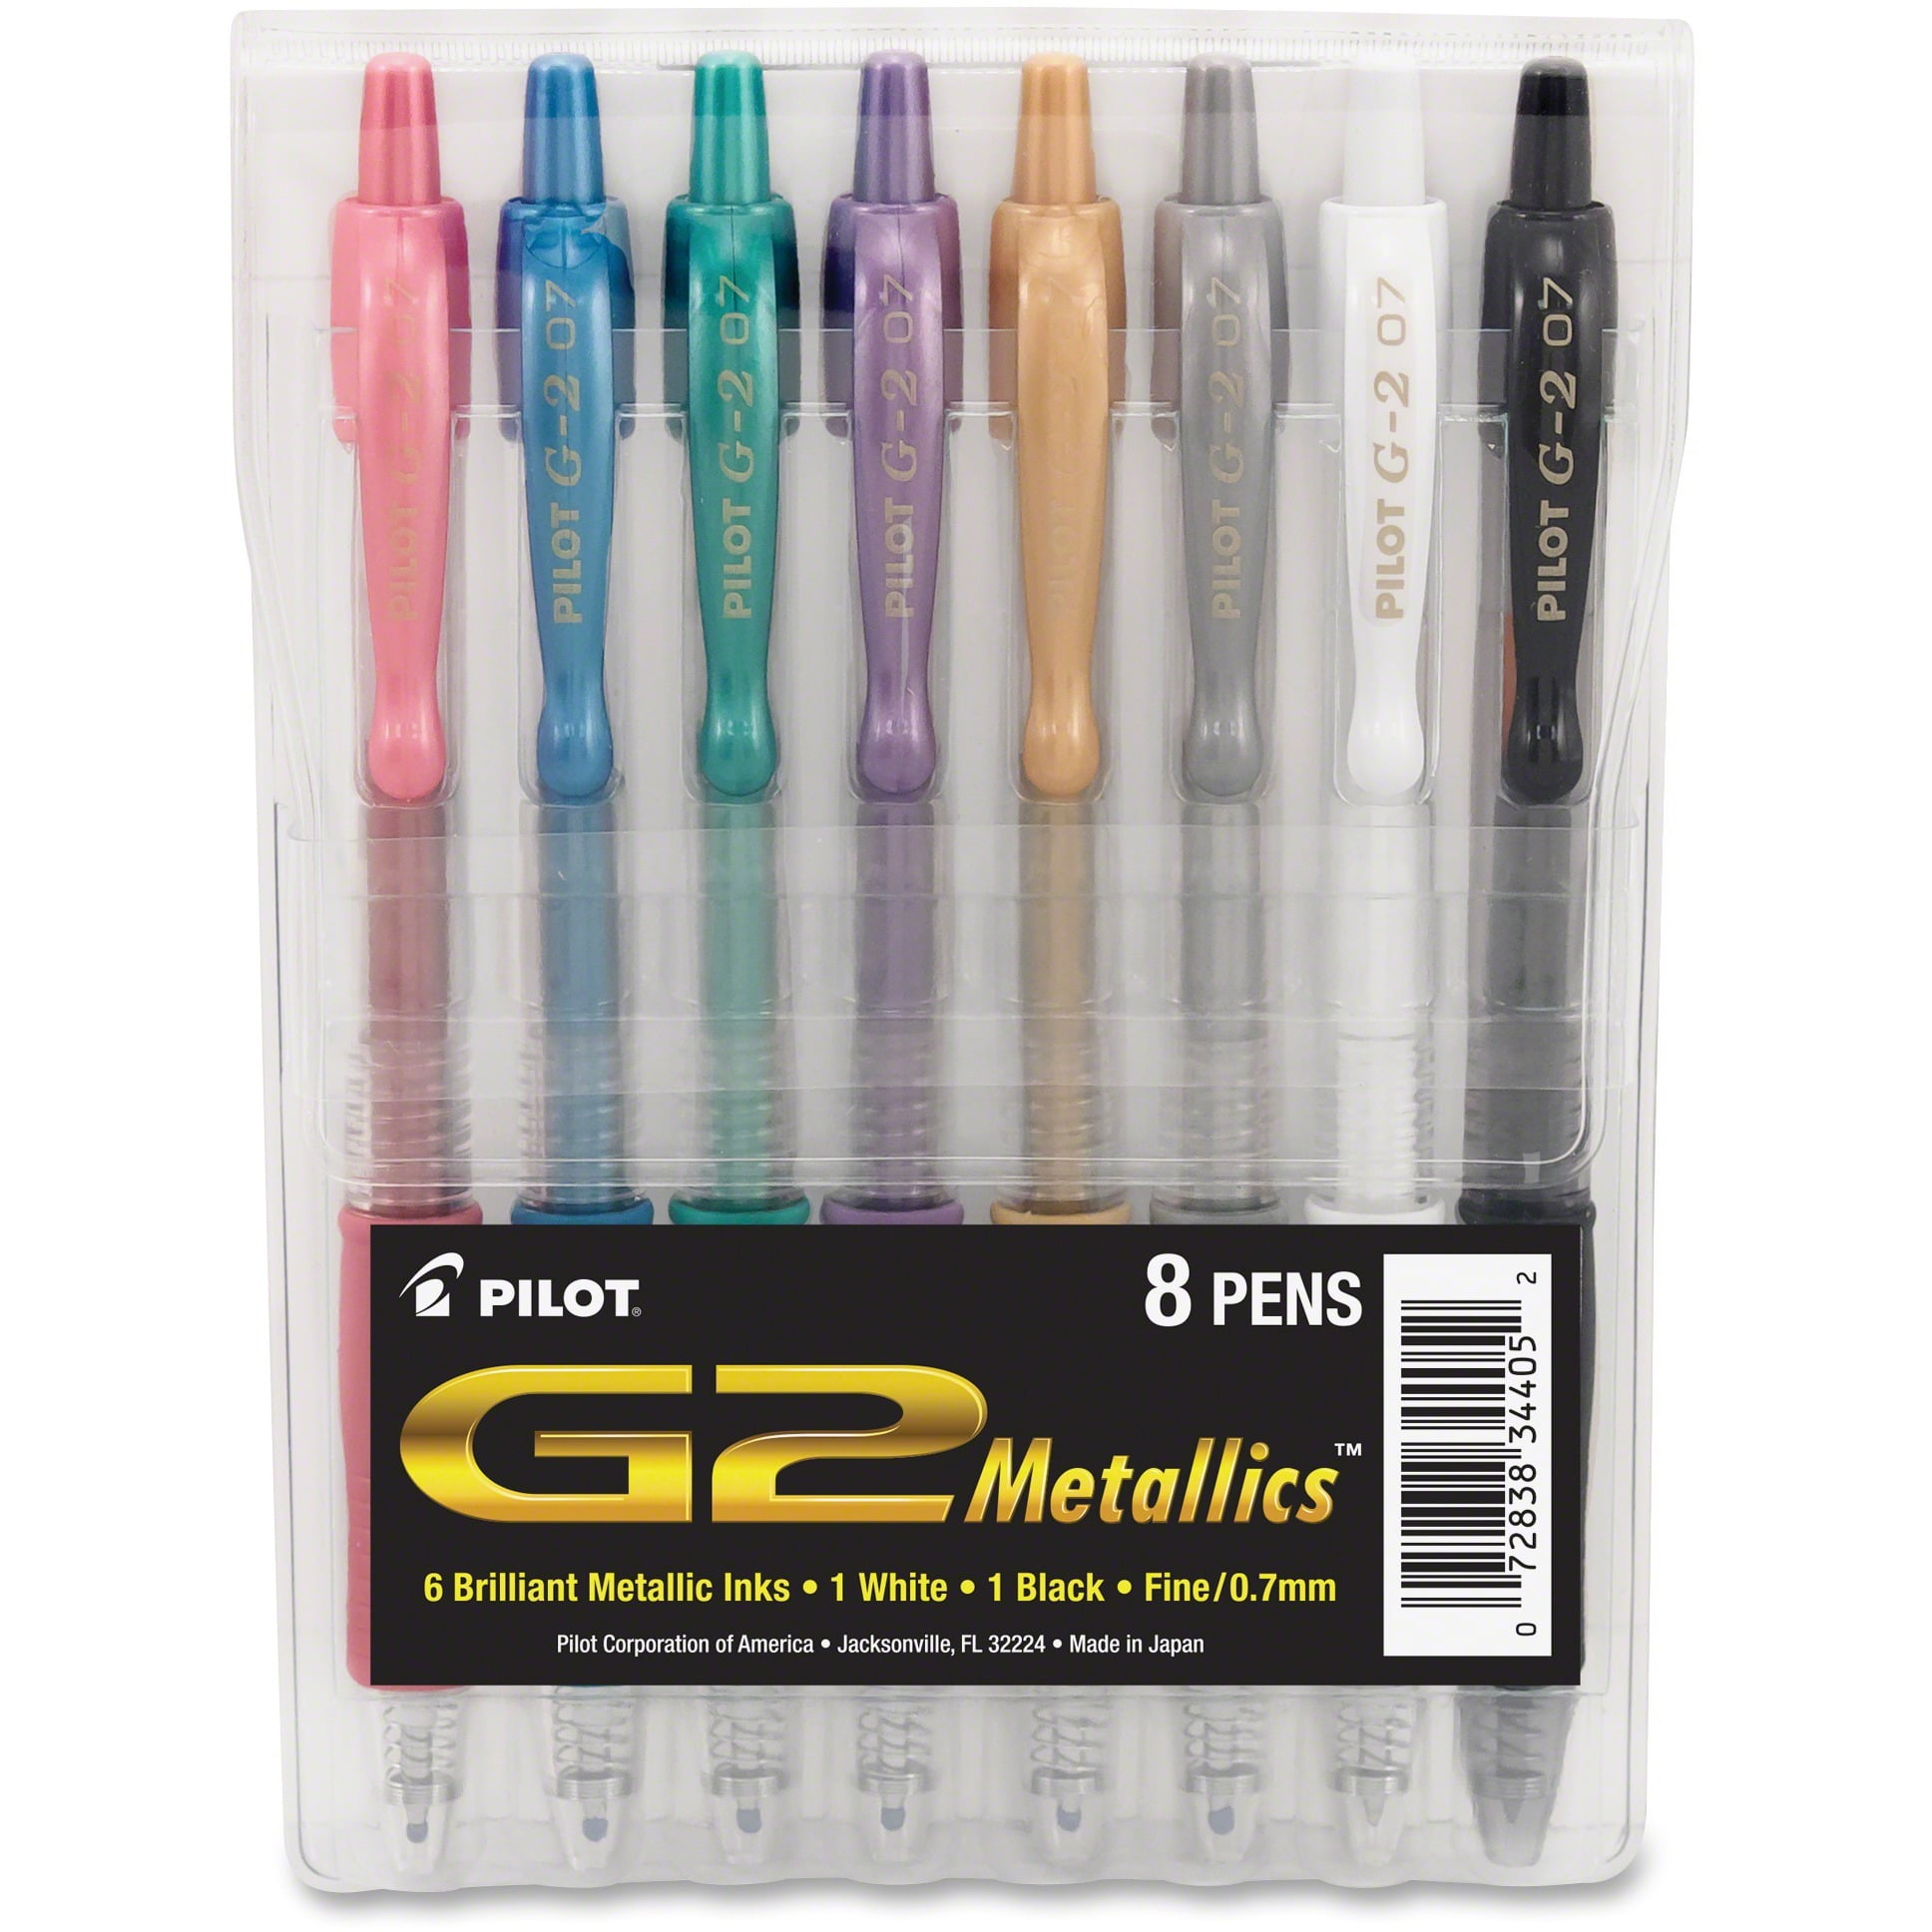 2 Pack of 8 PILOT G2 Premium Refillable /& Retractable Rolling Ball Gel Pens Assorted Color Inks, 31128 Fine Point